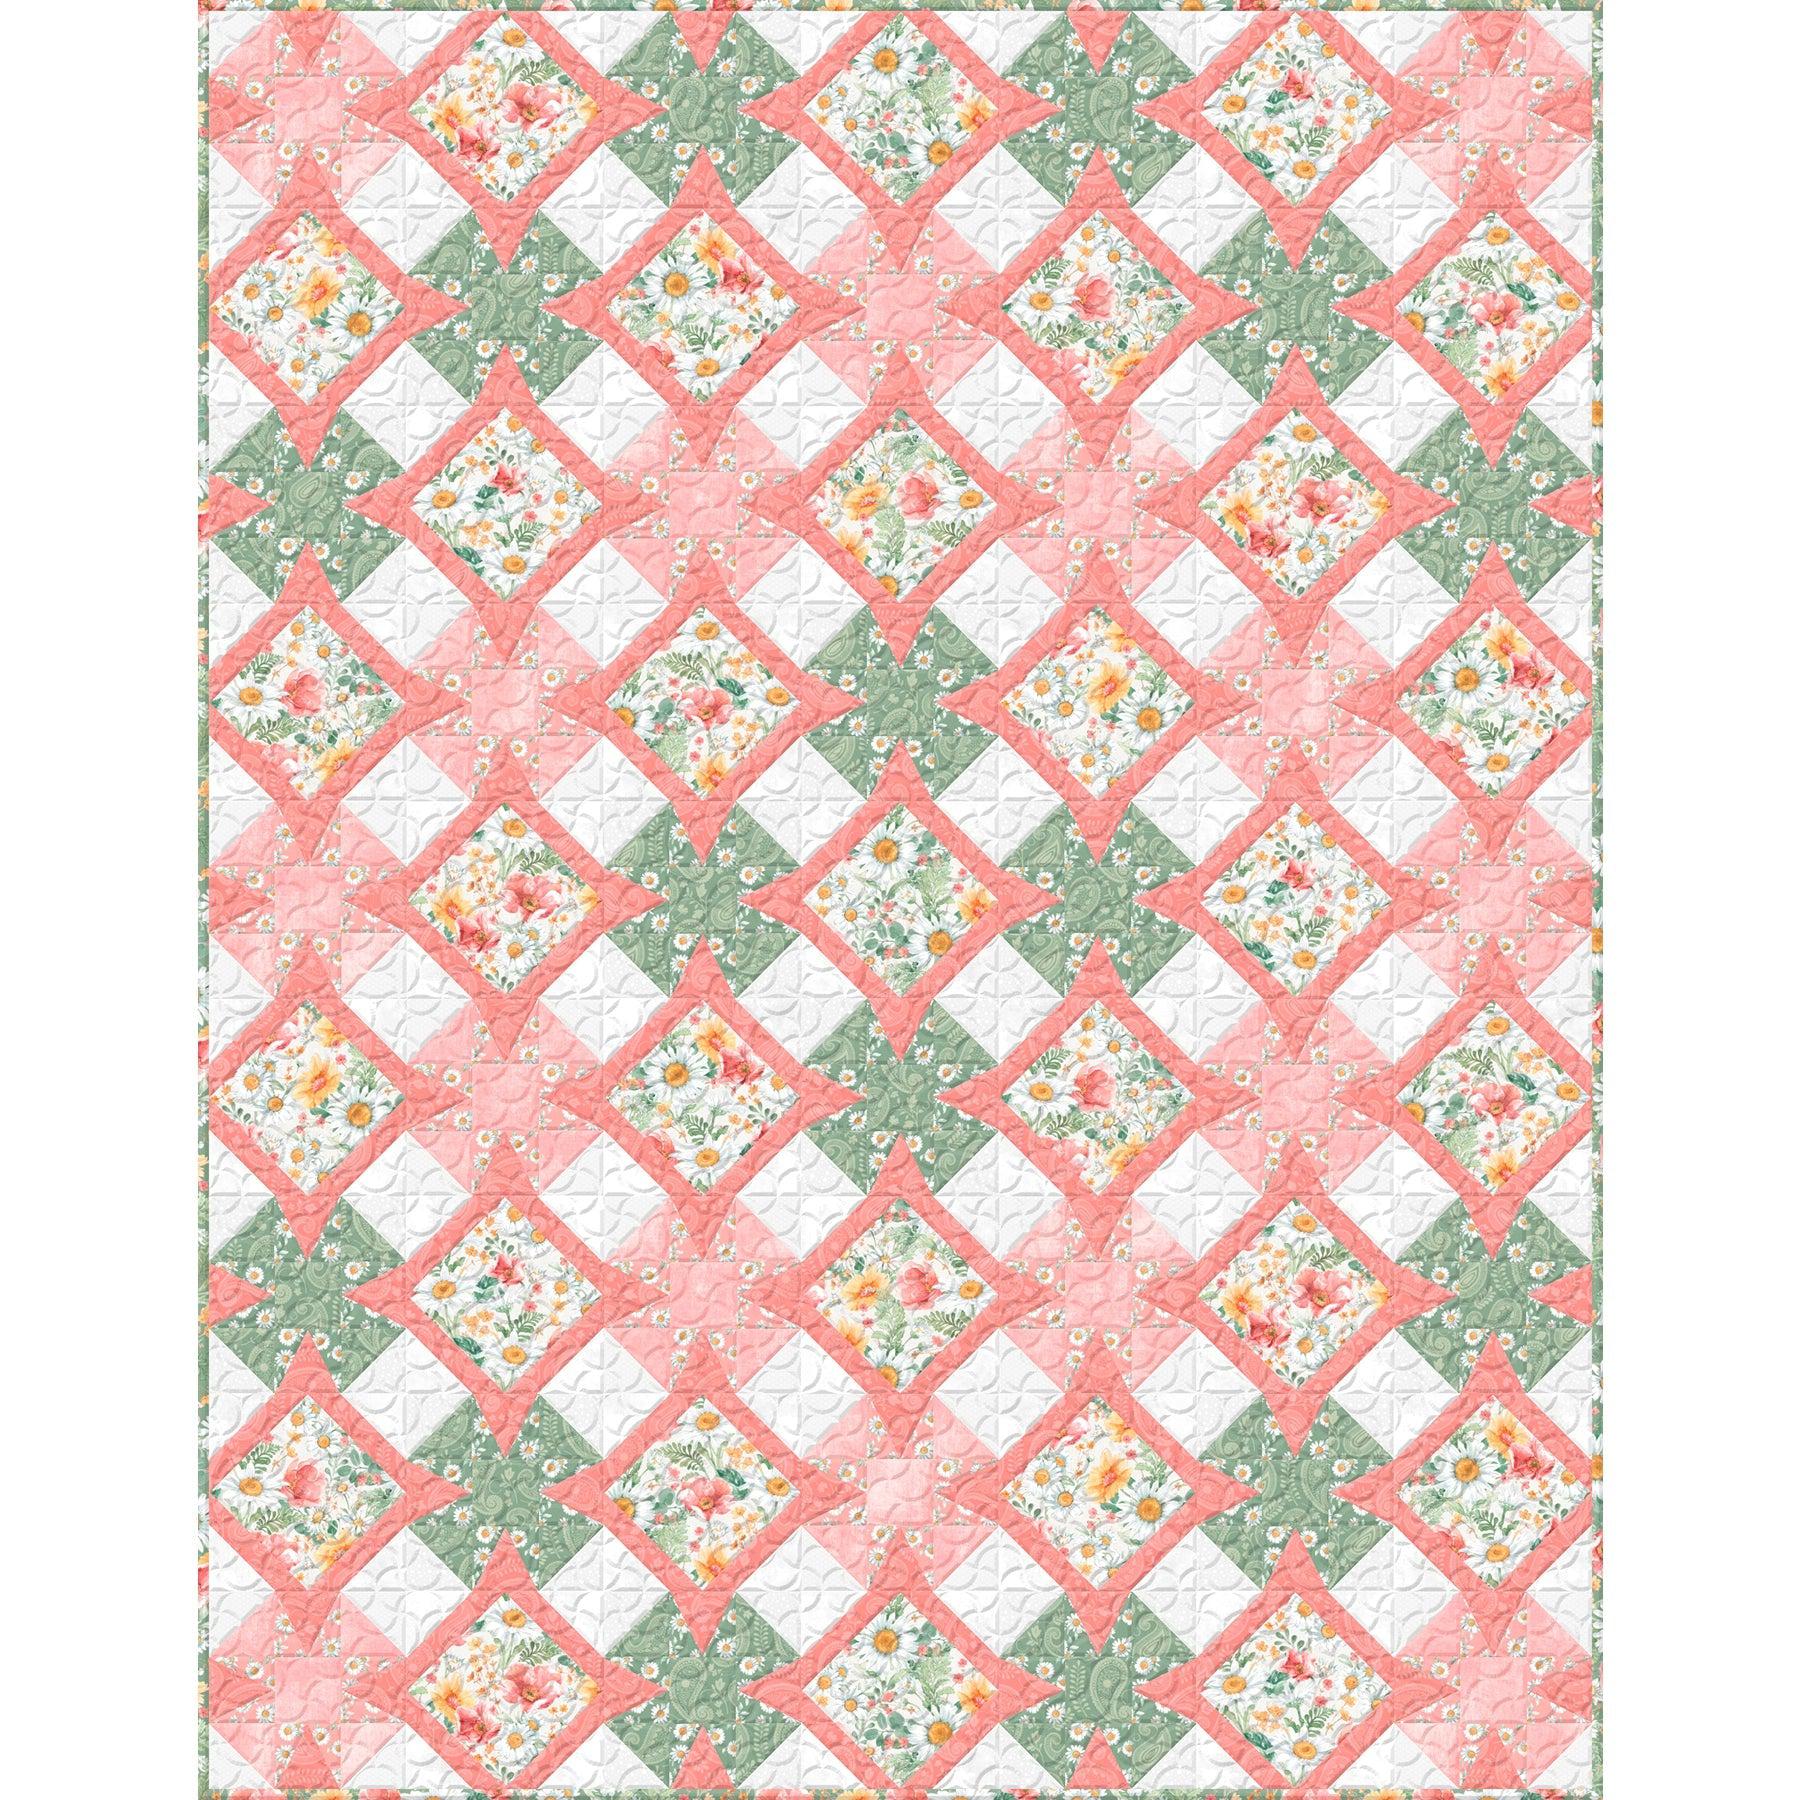 Basic Twin Quilt #7 - Free Digital Download-Wilmington Prints-My Favorite Quilt Store